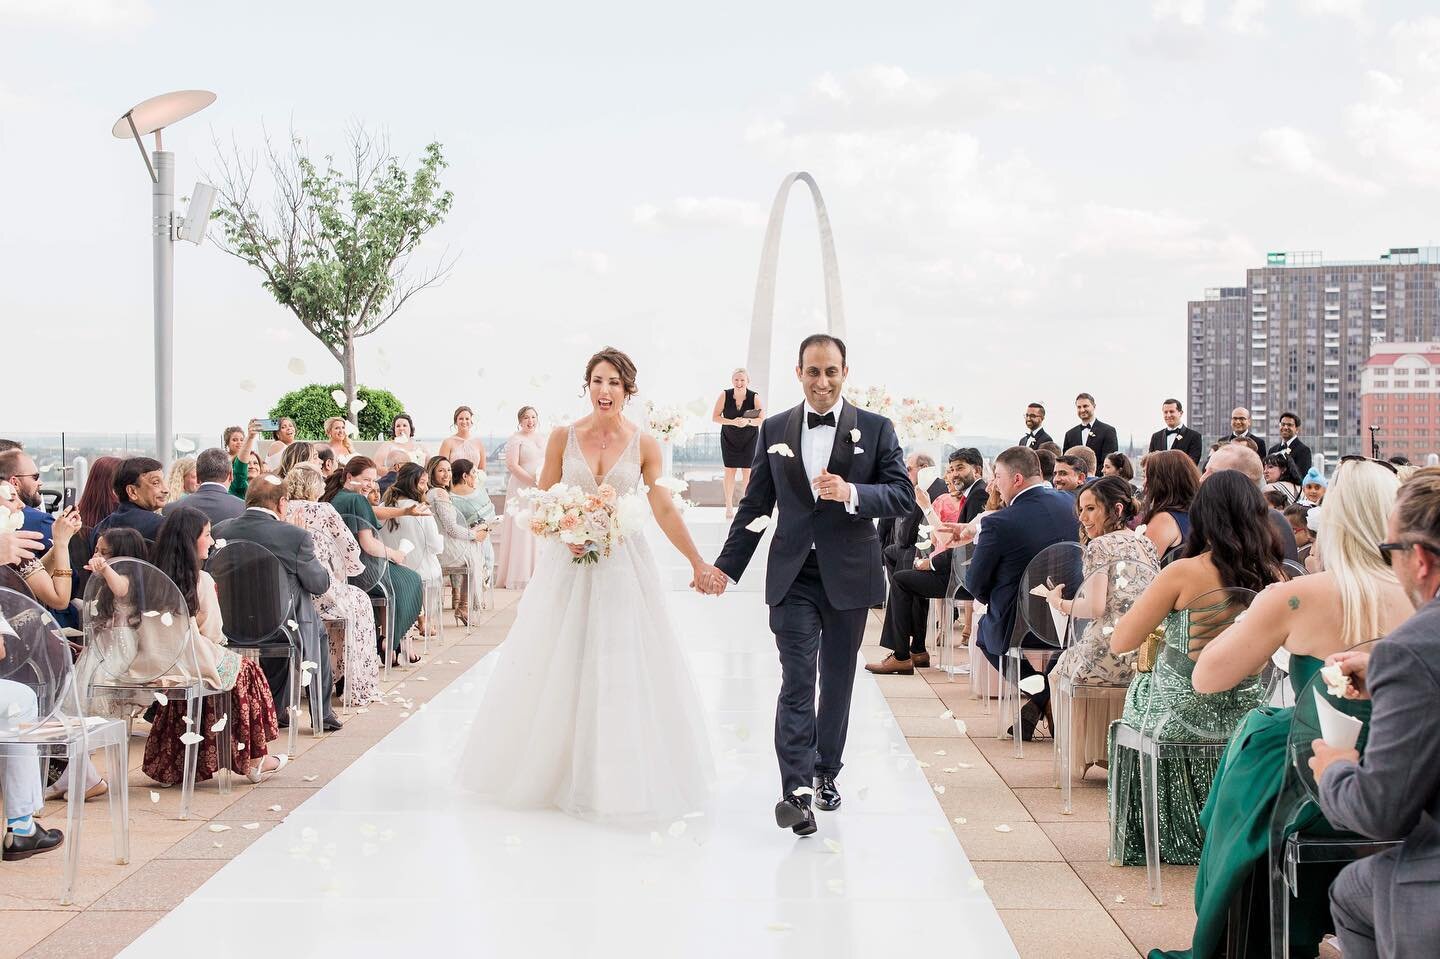 It&rsquo;s such an honor to witness the pure joy that comes from moments like THIS. 💕
.
.
.
.
.
Planner @ssdevents 
Venue @fsstlouis 
Florals @anaffairtorememberstl 
Beauty @looksbylisastl 
Photo @chelsealieferphoto 
Stationery @onthreedesigns 
Rent